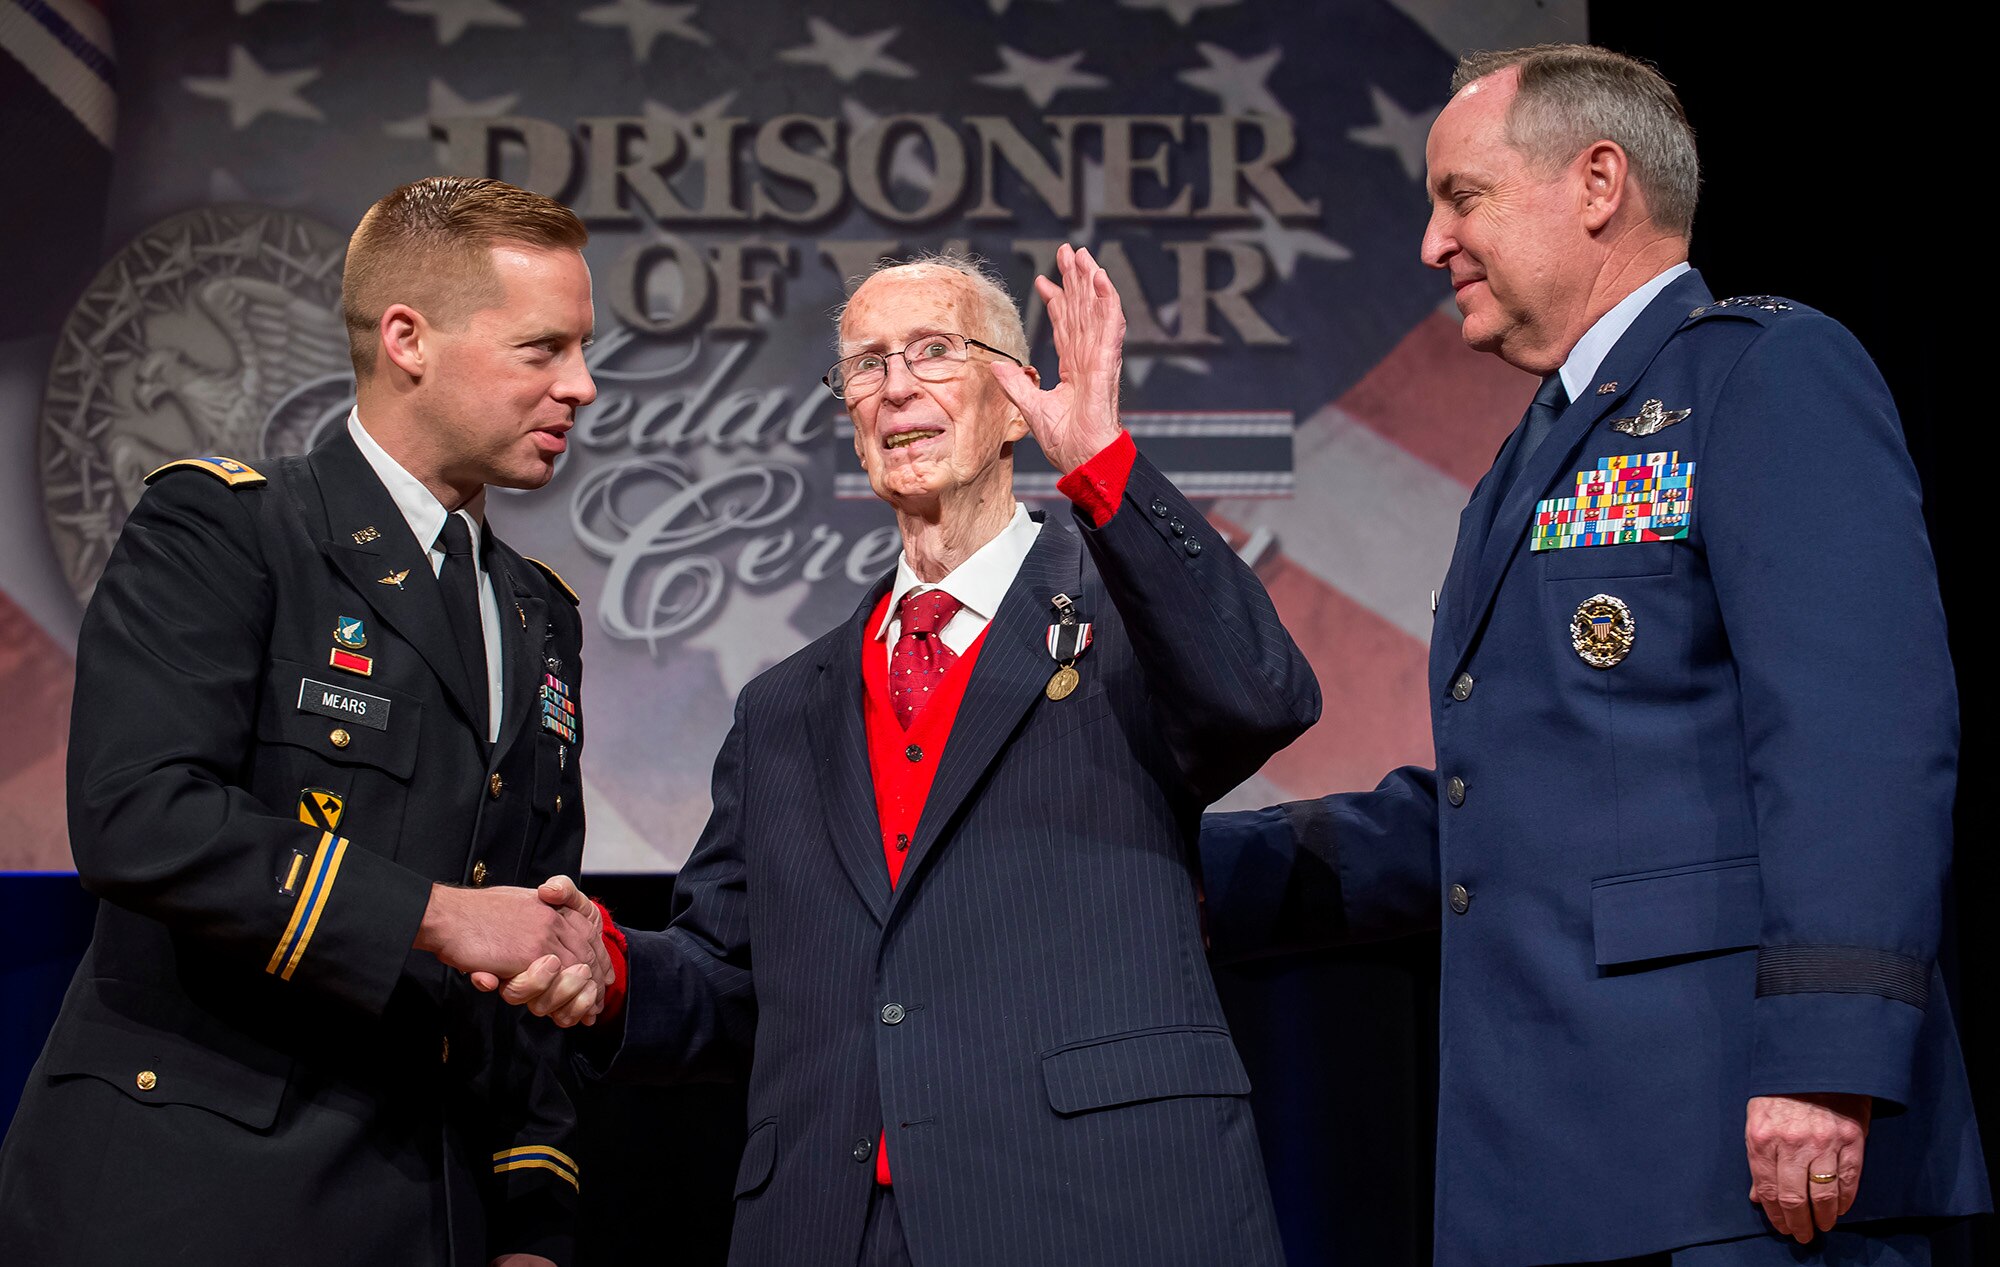 Air Force Chief of Staff Gen. Mark A. Welsh III (right) presented the Prisoner of War medal to 1st Lt. James Mahon April 30, 2014, during a ceremony in the Pentagon. Mahon and eight other aviators, all bomber crew members, were shot down flying missions over Germany and were held in a prison camp in Wauwilermoos, Switzerland. Then Acting Secretary of the Air Force Eric Fanning authorized the medal for 143 Army Air Corps aviators in October 2013, after the Airmen were denied the proper status for decades. (U.S. Air Force photo/Jim Varhegyi)